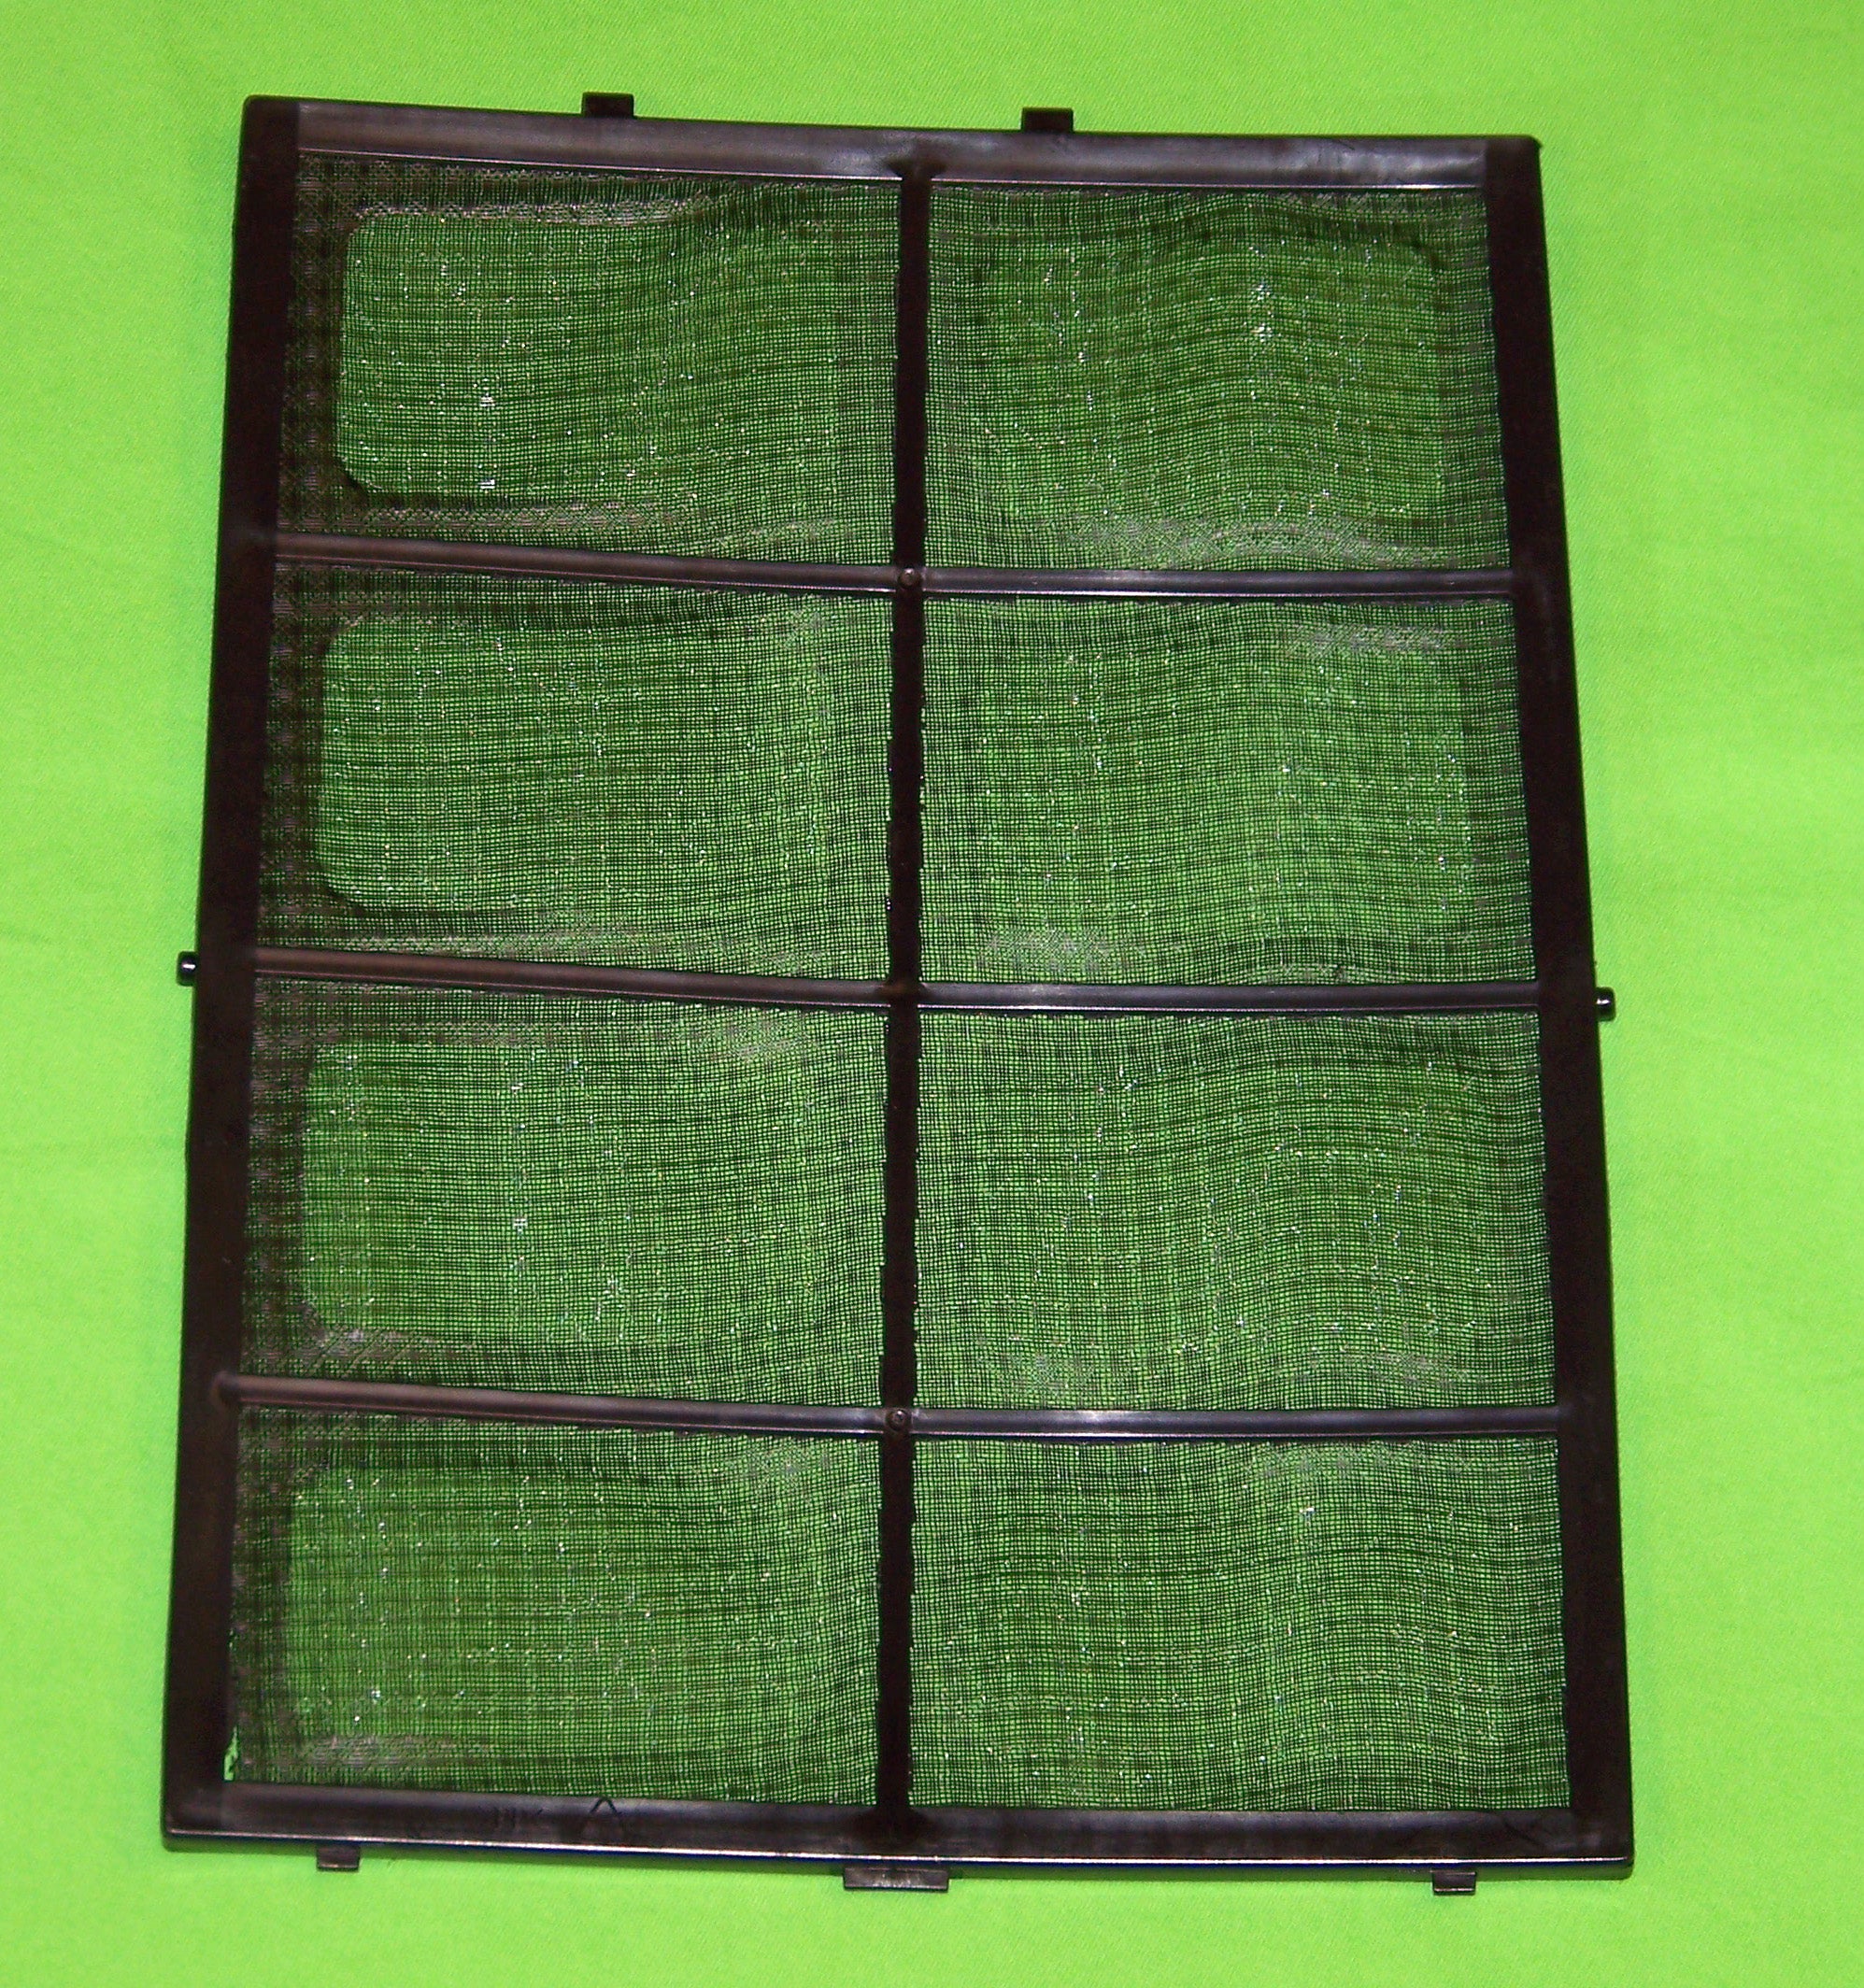 OEM Delonghi Air Conditioner Filter Originally Shipped With: PACWE125, PACWE130